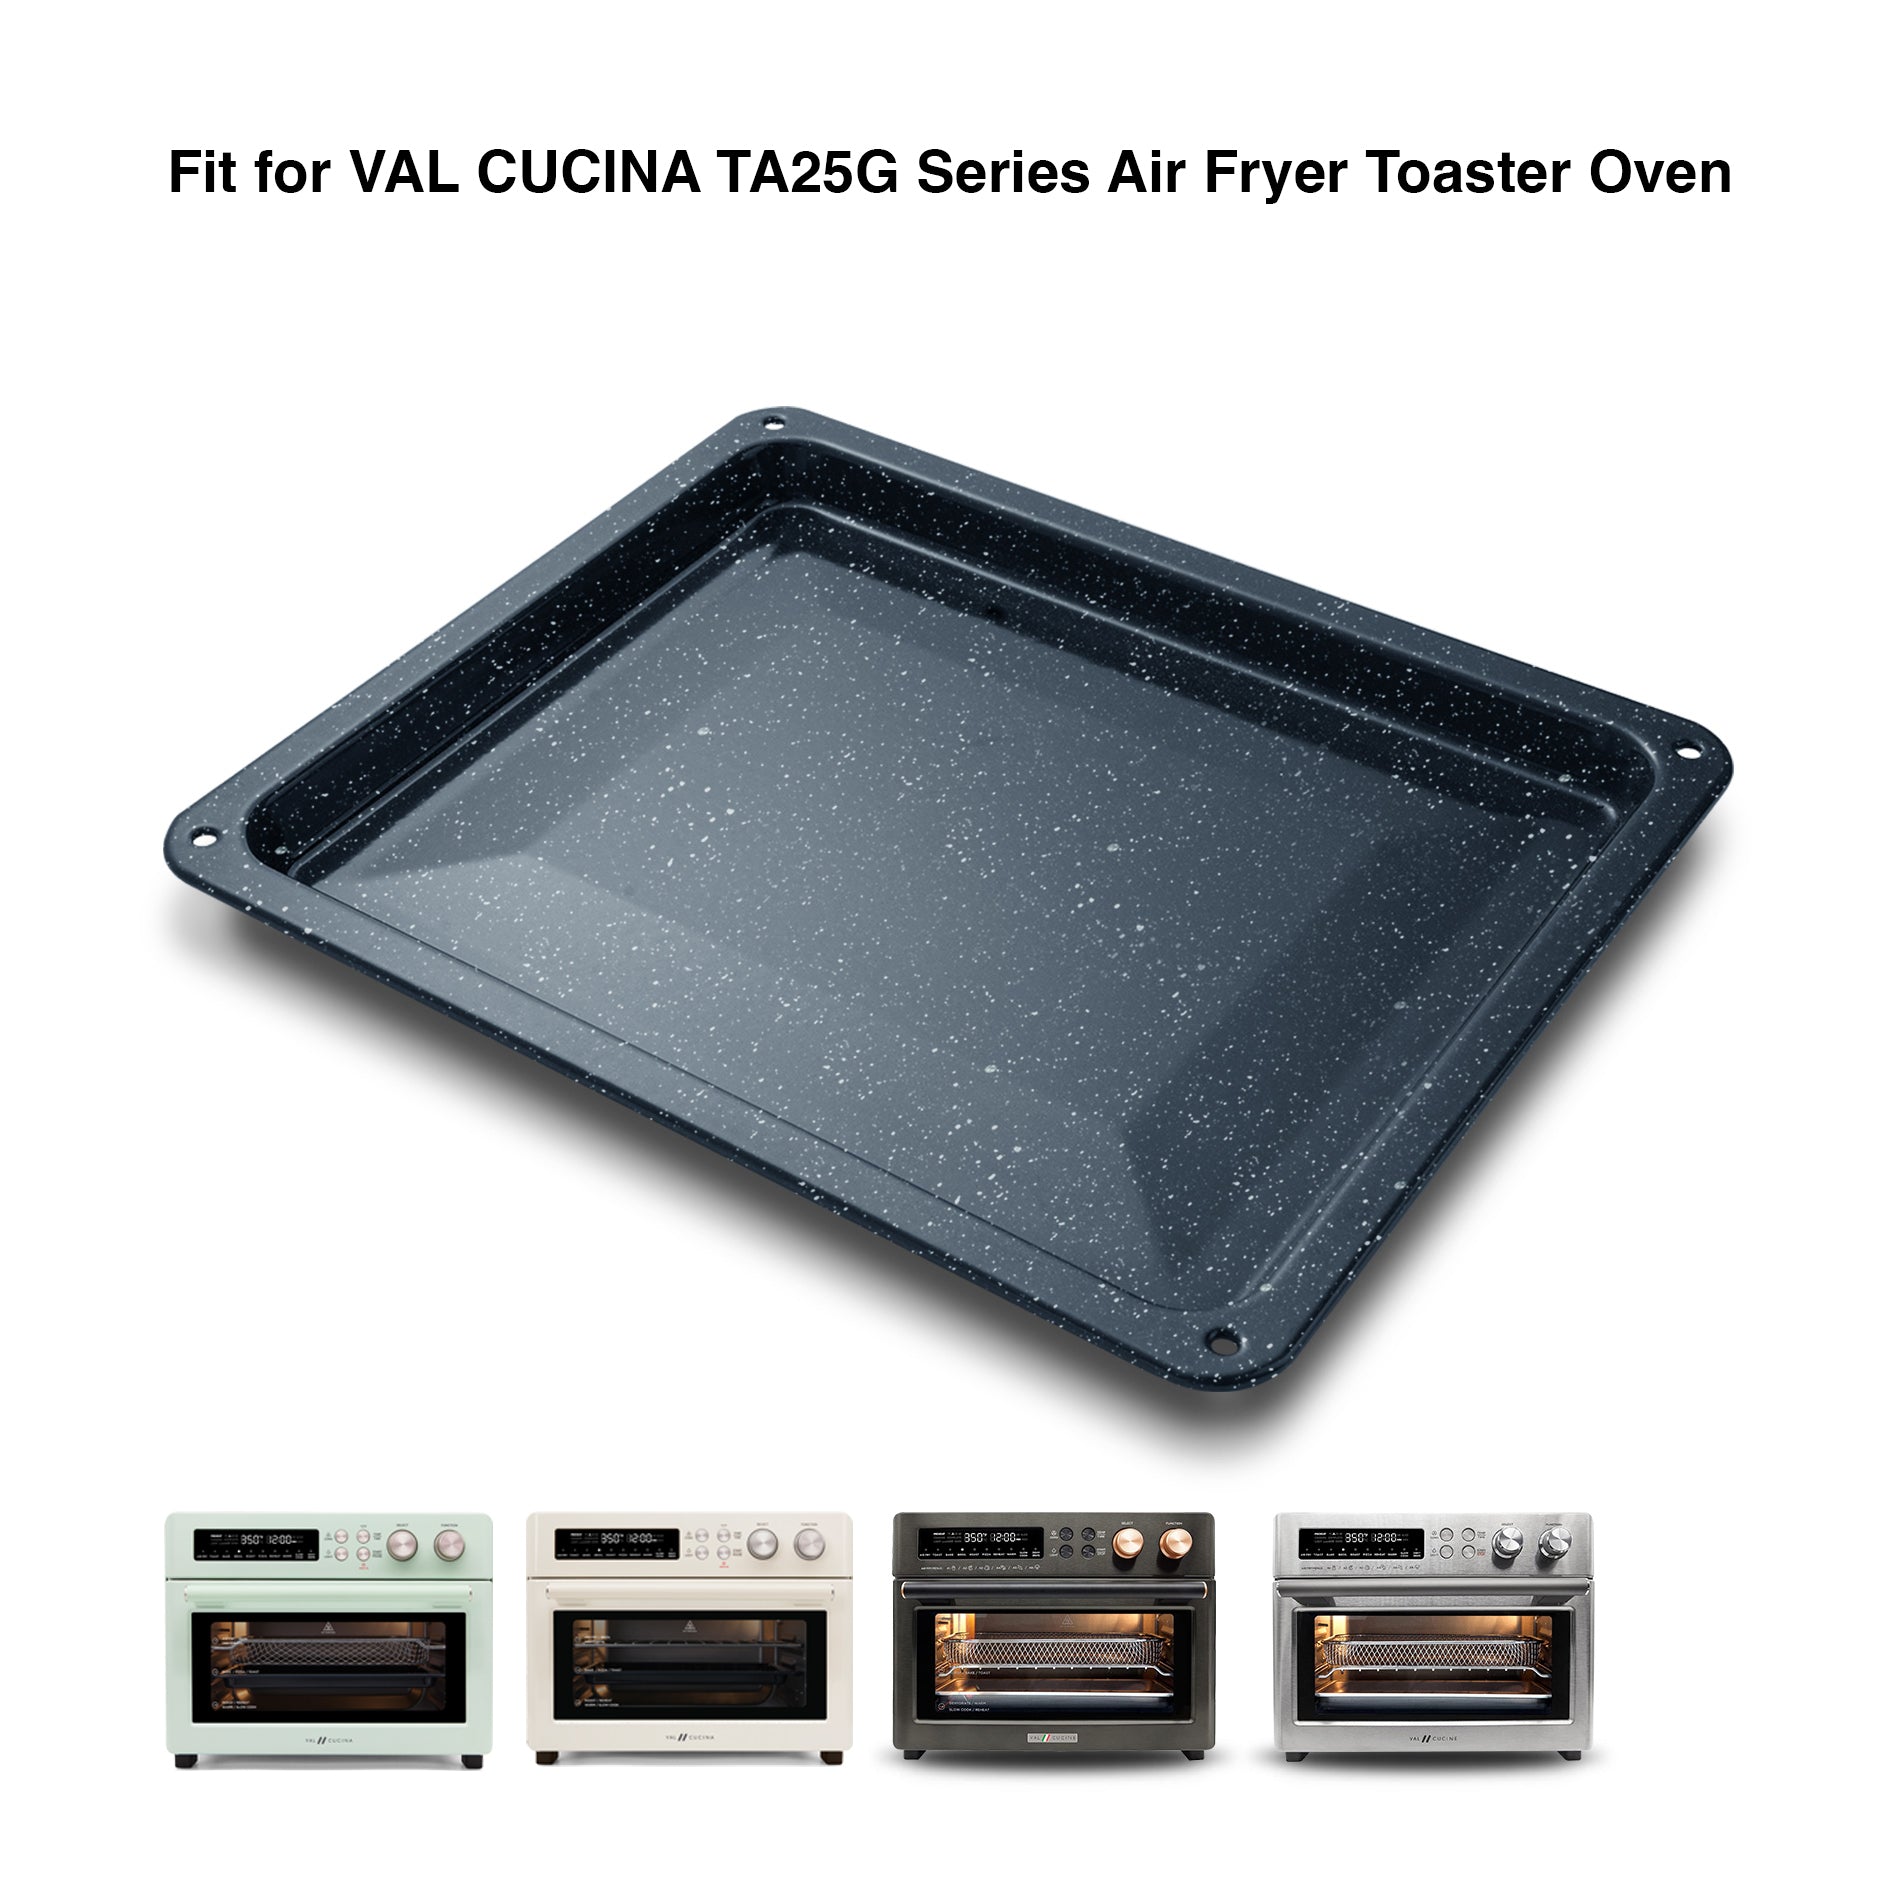 VAL CUCINA Enamel Baking Pan, Compatible with TA-25G Air Fryer